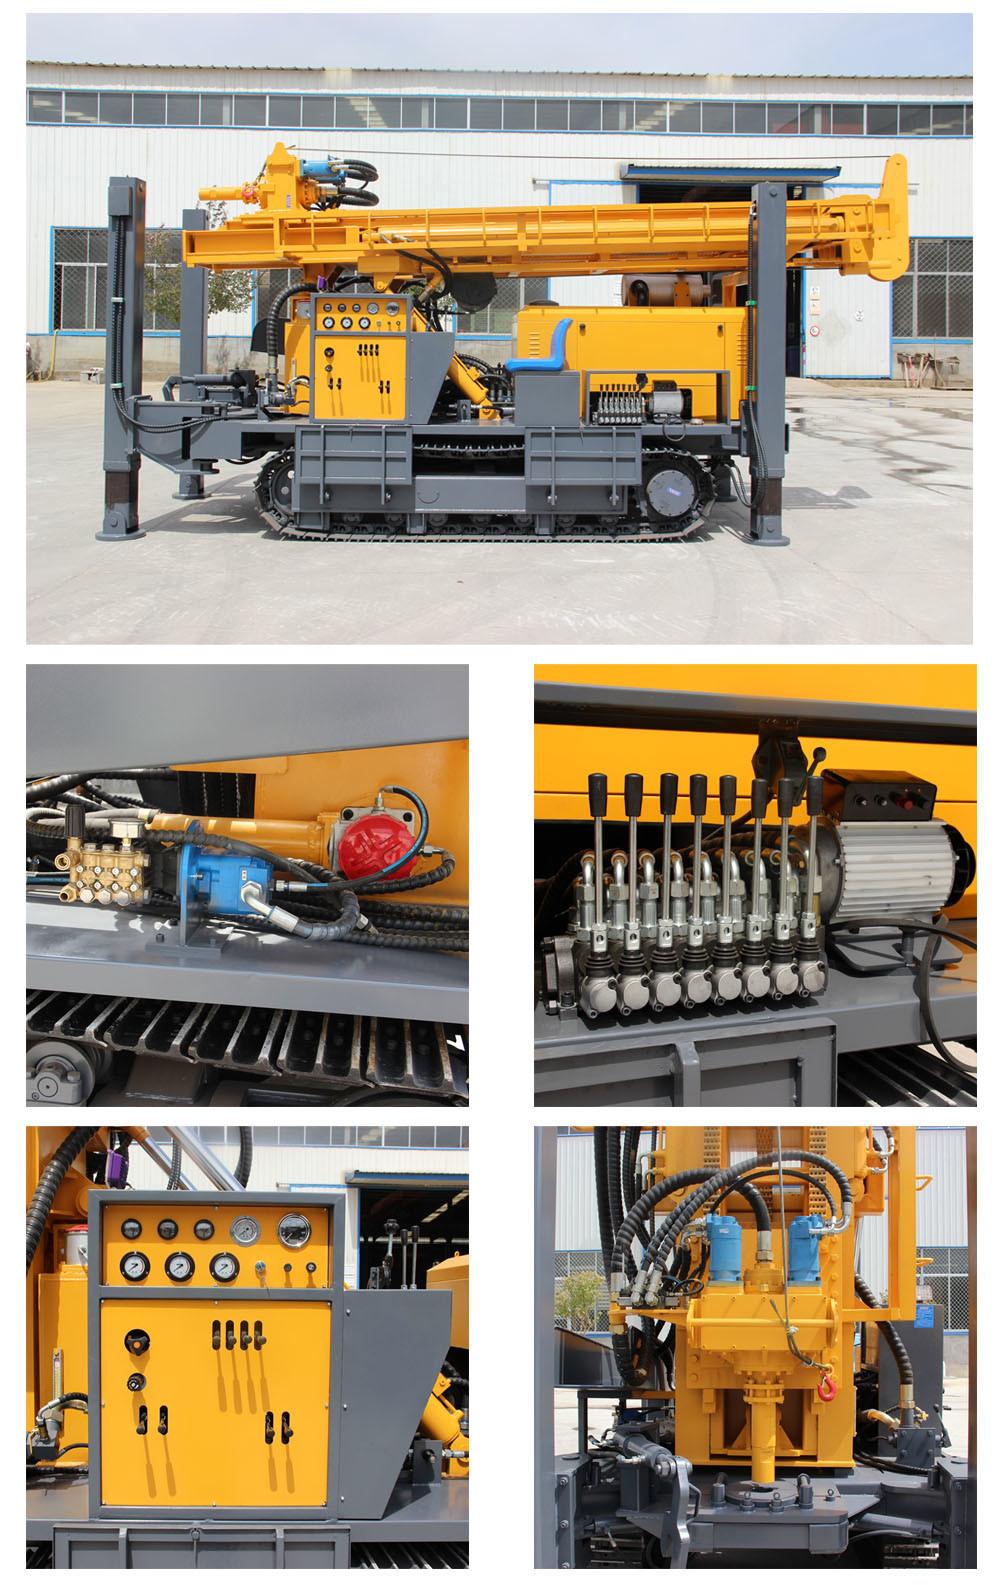 Down The Hole Drilling DTH Hydraulic Control Rotary Water Well Drilling Rig Machine Price